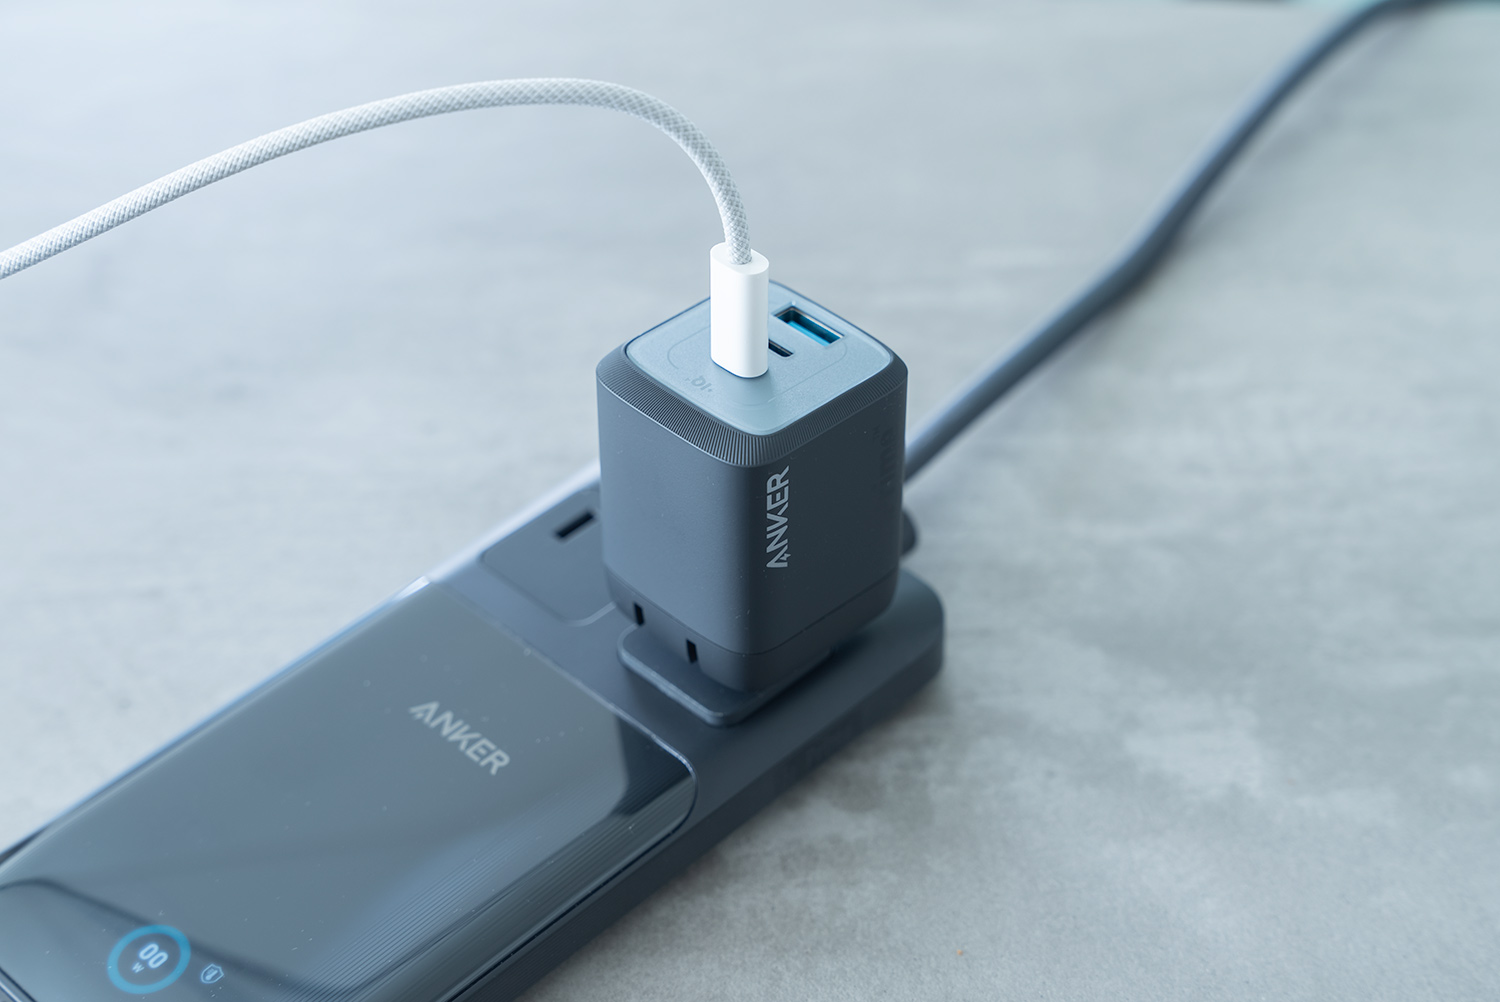 Anker Prime Wall Charger (67W, 3ports, GaN)の何がそんなにいいの？3つの理由